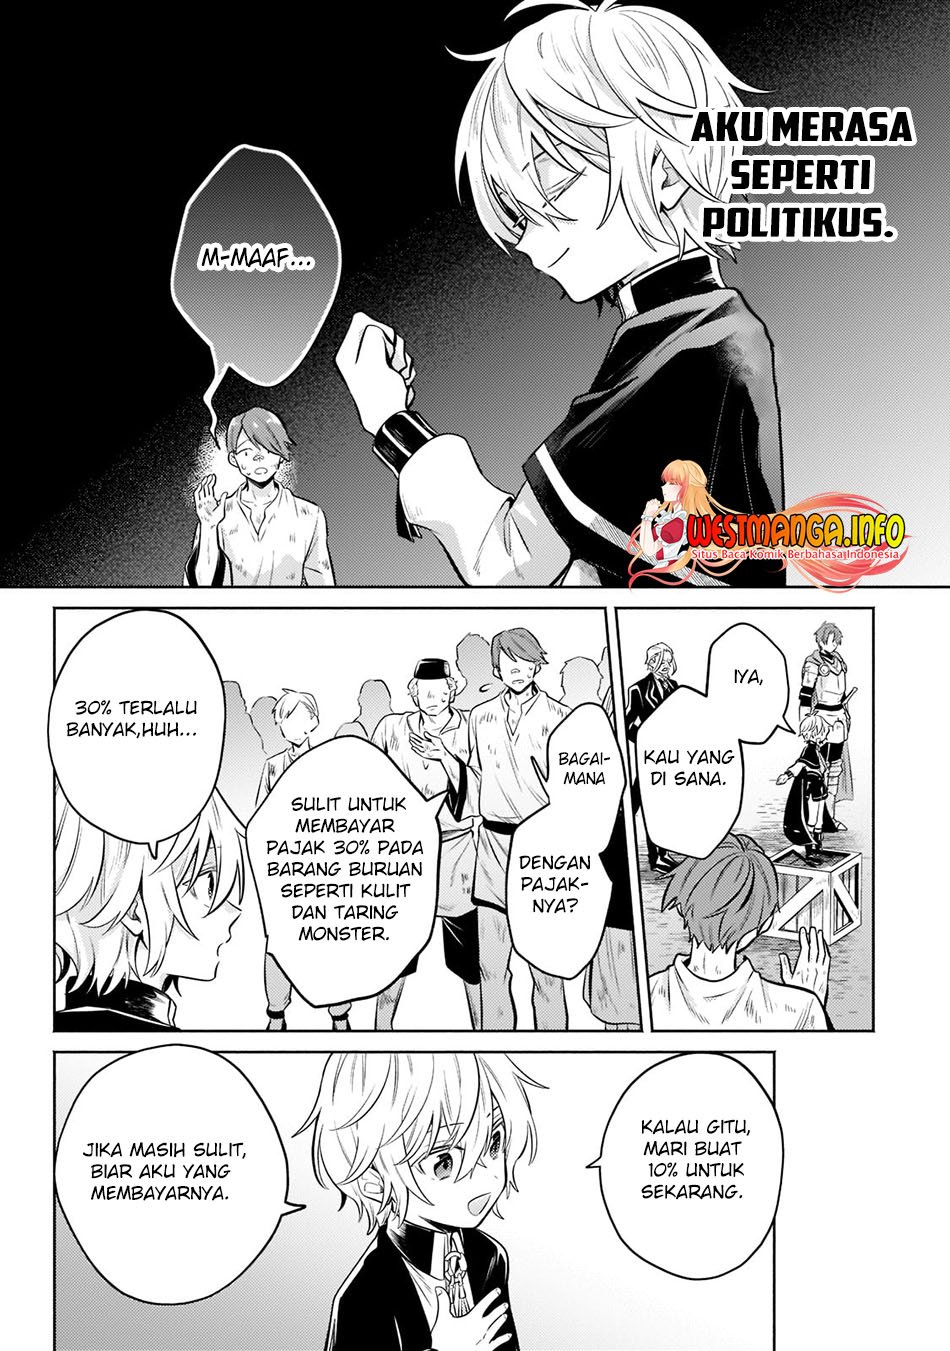 Fun Territory Defense Of The Easy-Going Lord ~The Nameless Village Is Made Into The Strongest Fortified City By Production Magic~ Chapter 07 - 207